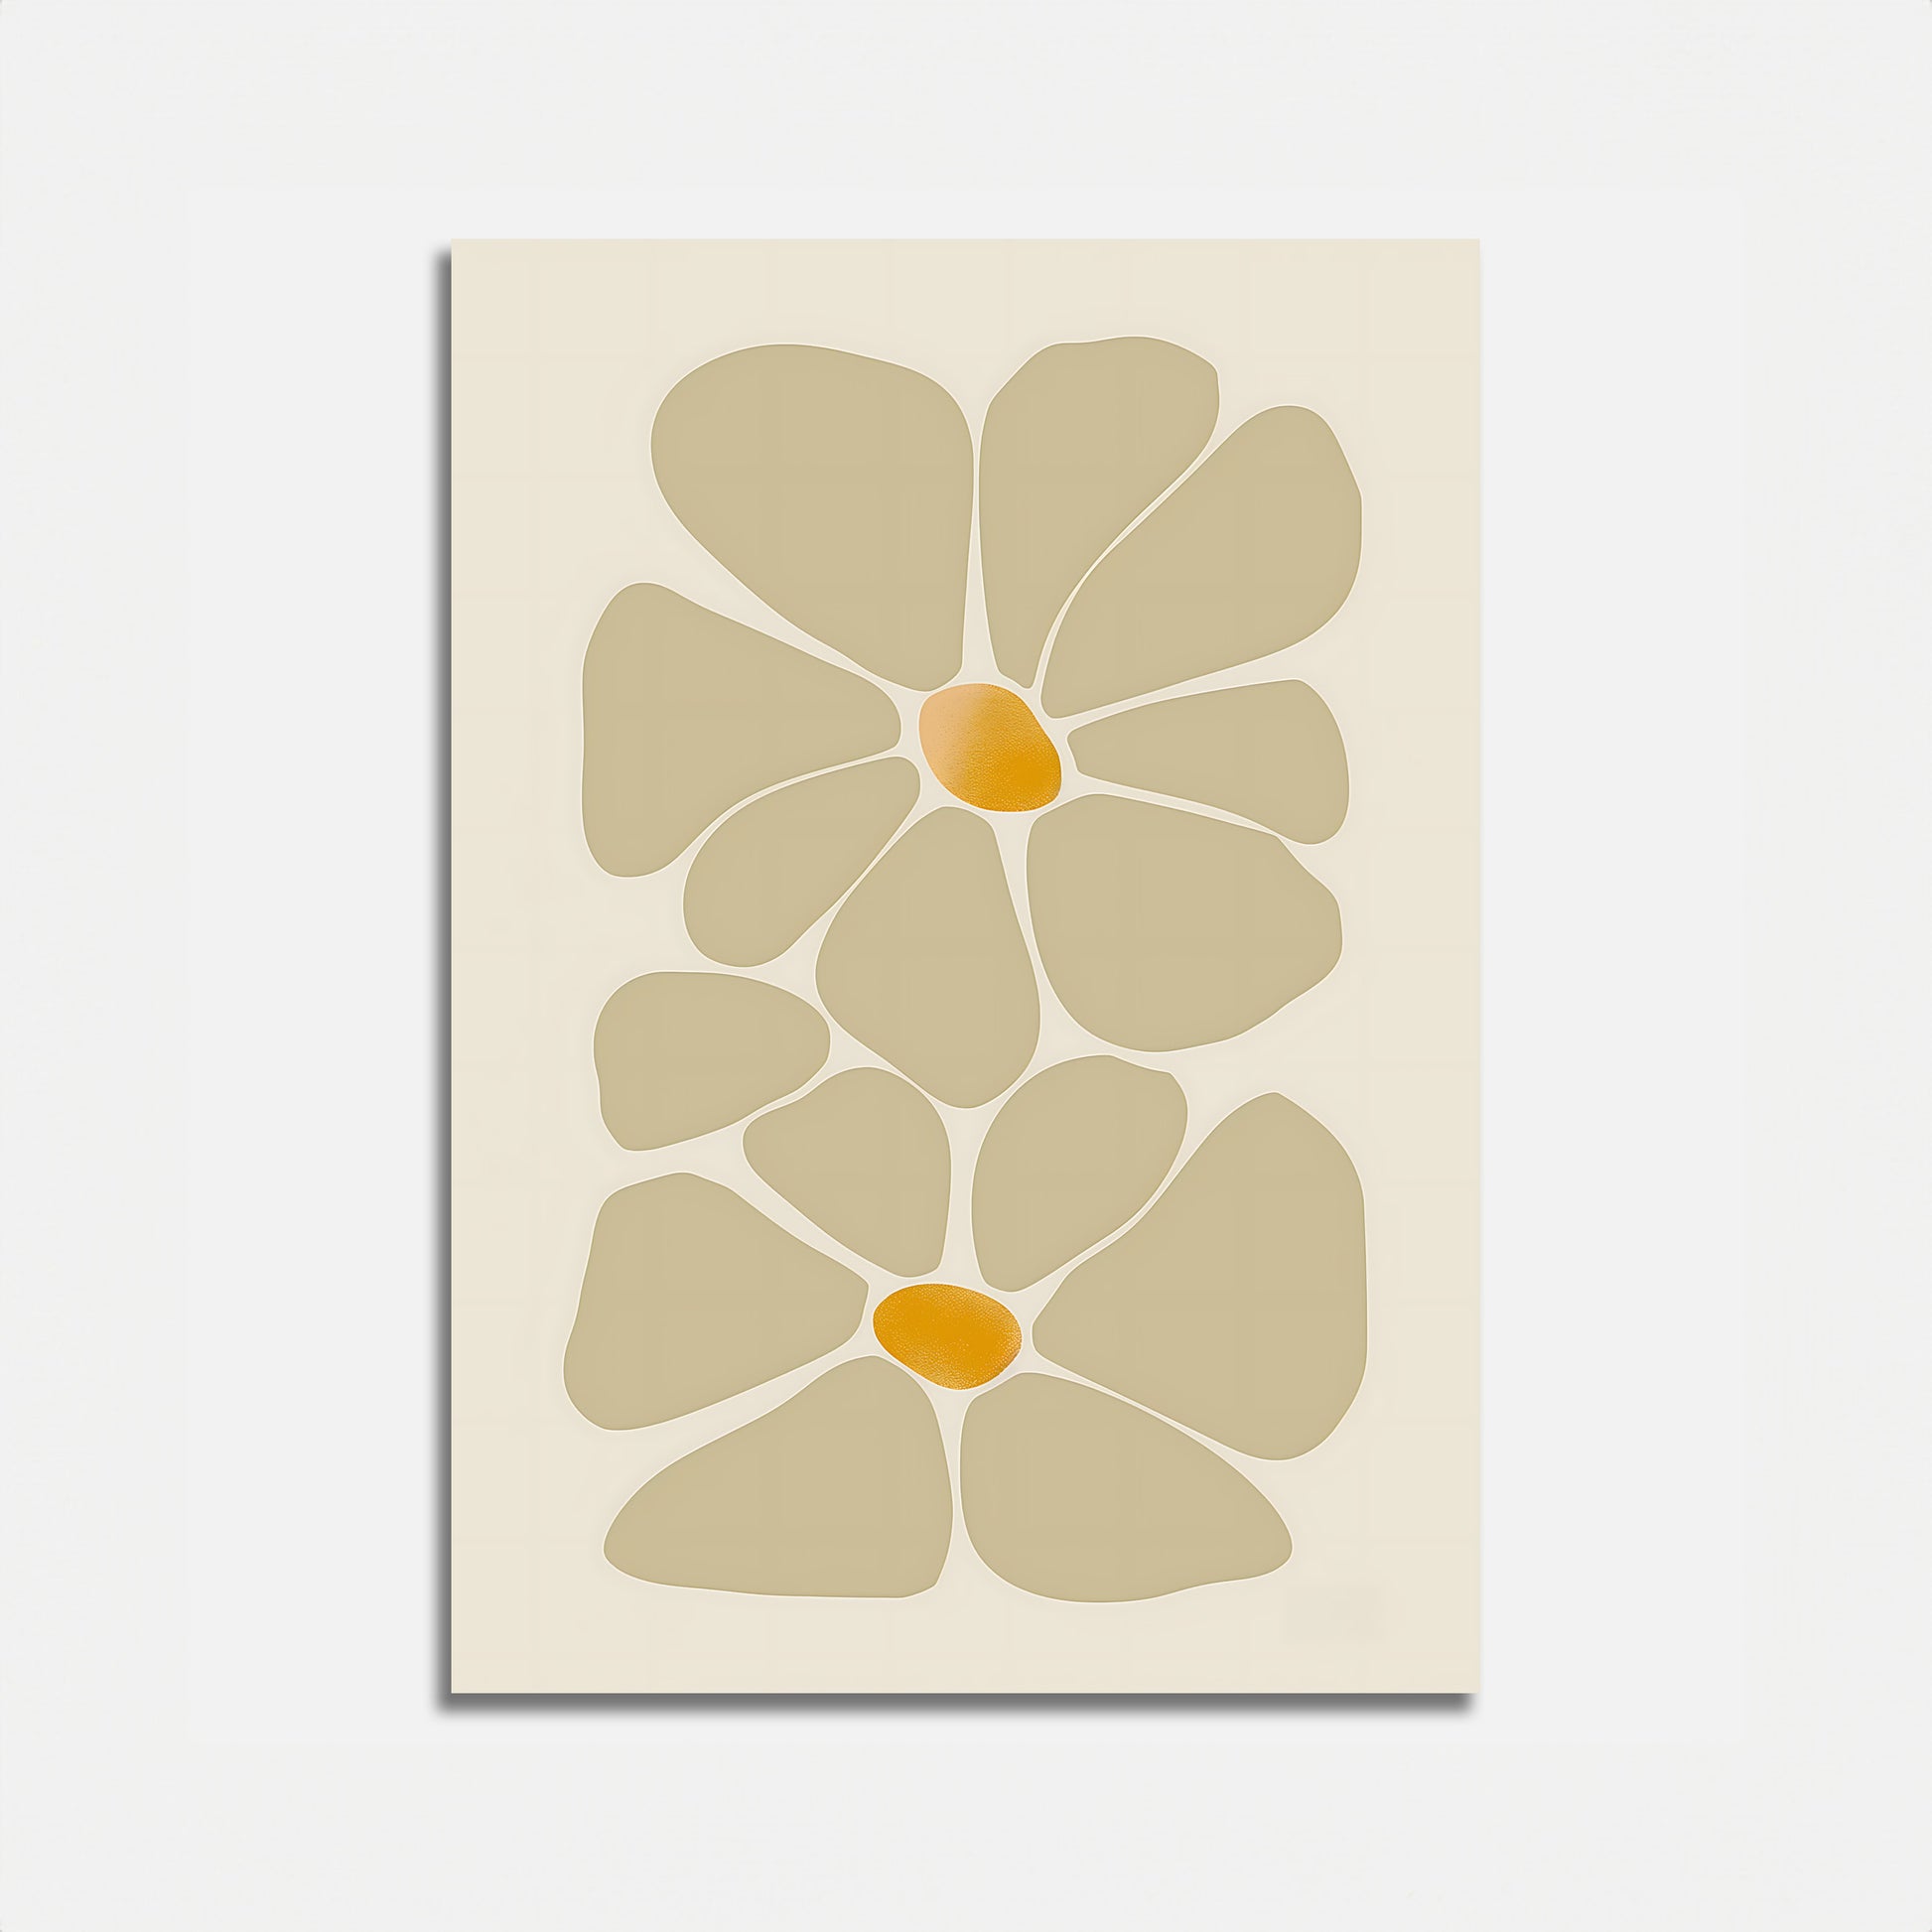 Abstract floral artwork with beige petals and yellow centers on a white canvas.